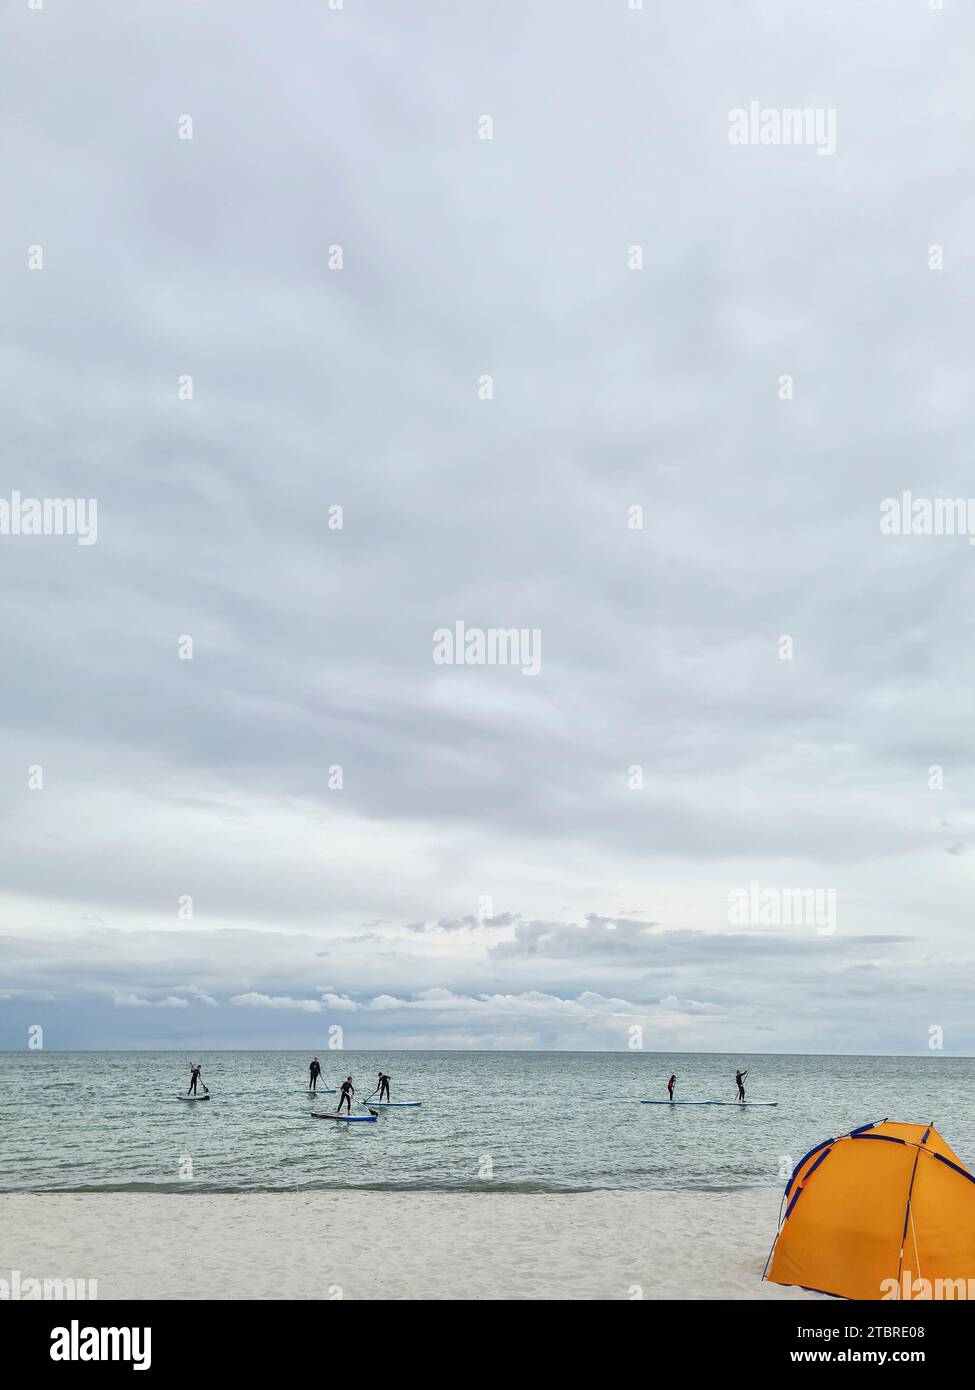 Germany, Mecklenburg-Vorpommern, peninsula Fischland-Darß-Zingst, several teenagers on SUP boards in the sea water on the beach of Prerow Stock Photo